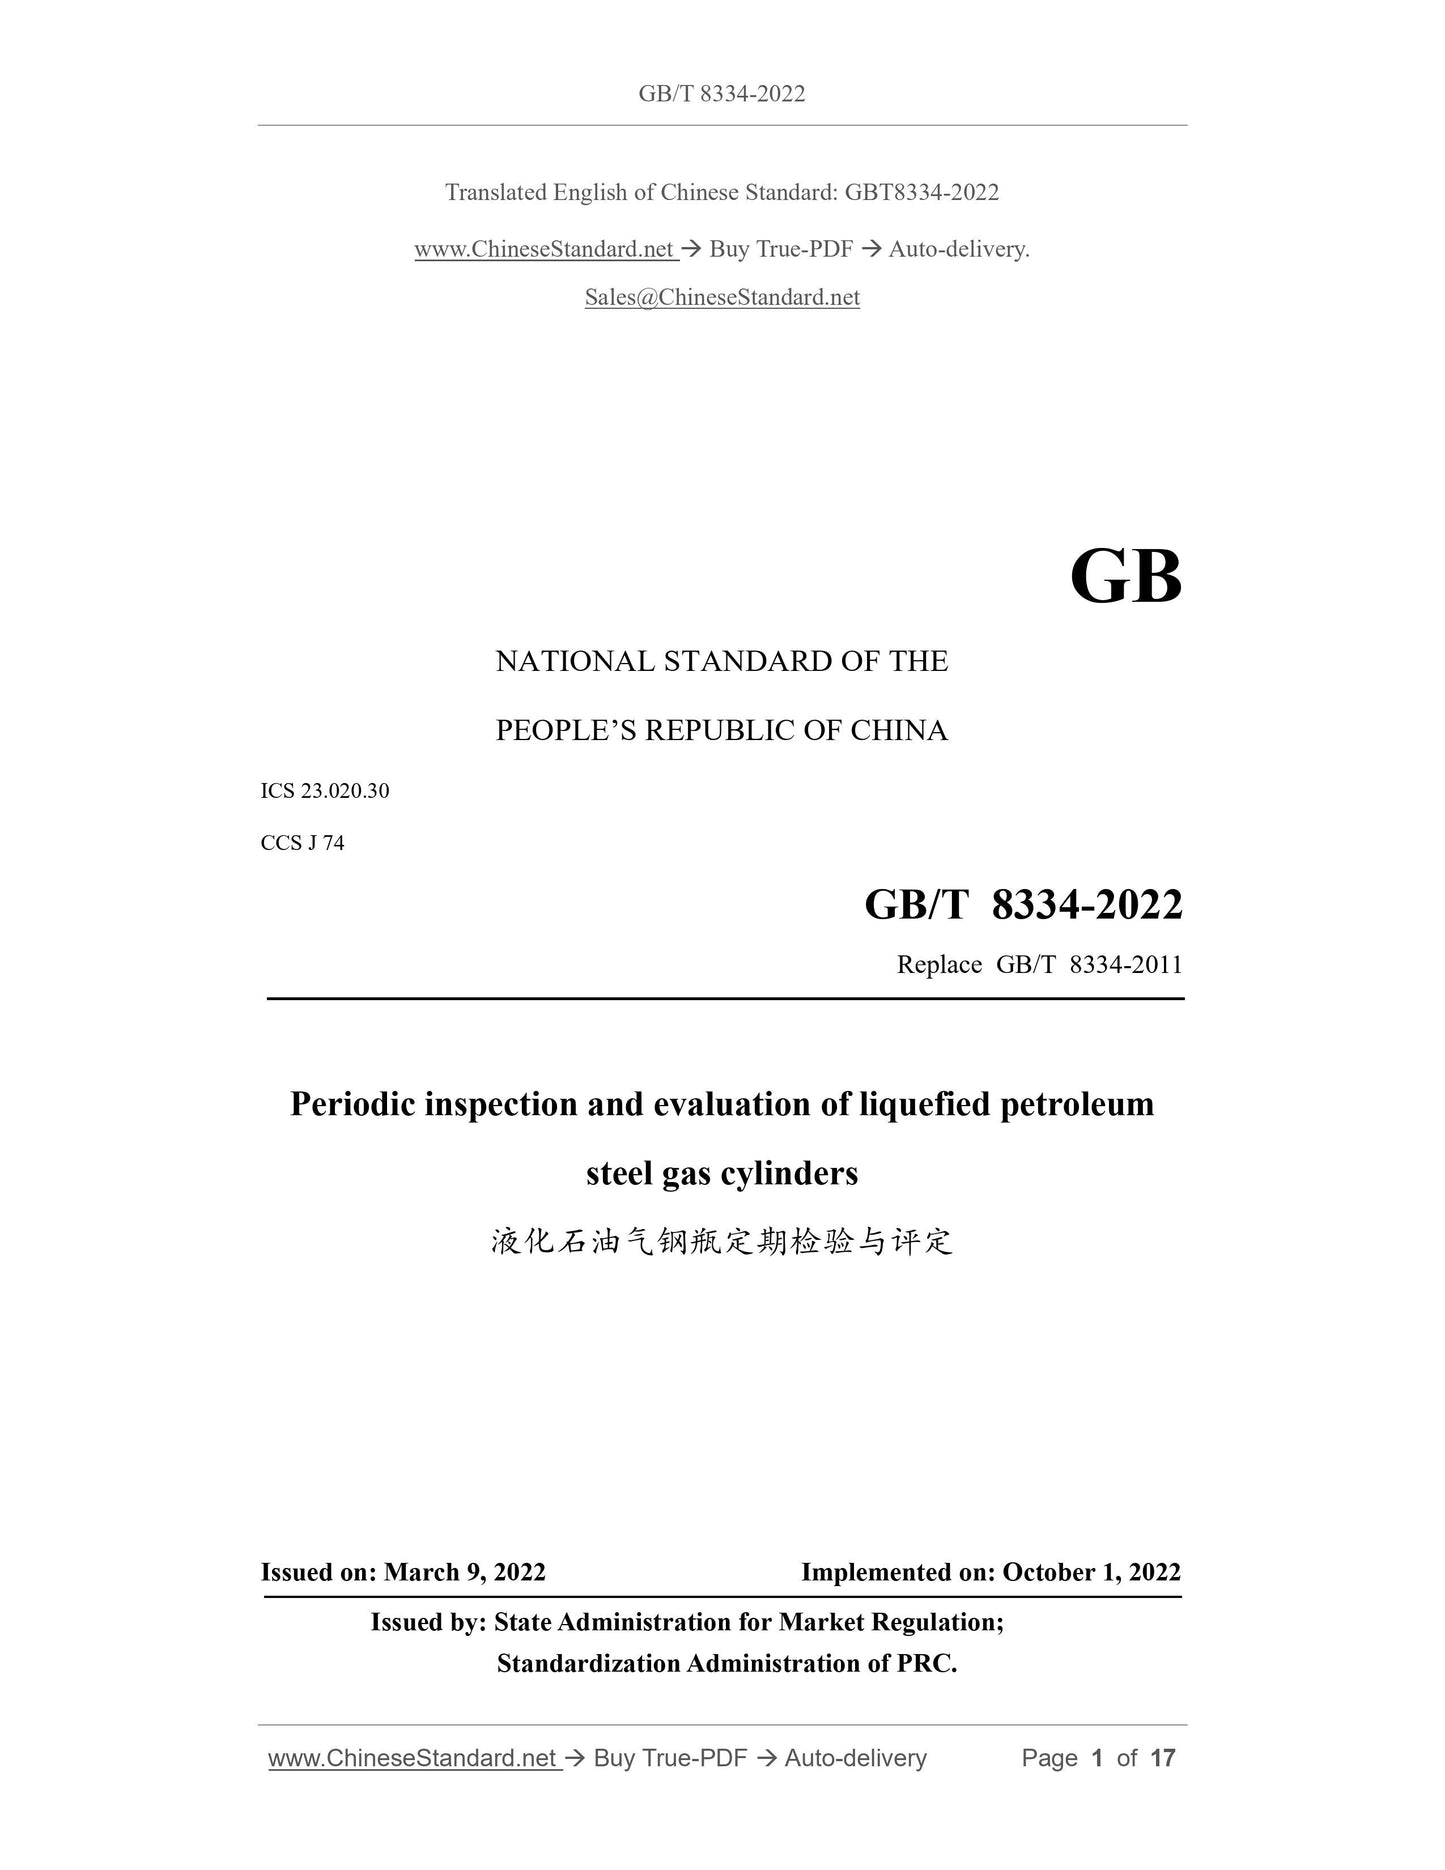 GB/T 8334-2022 Page 1